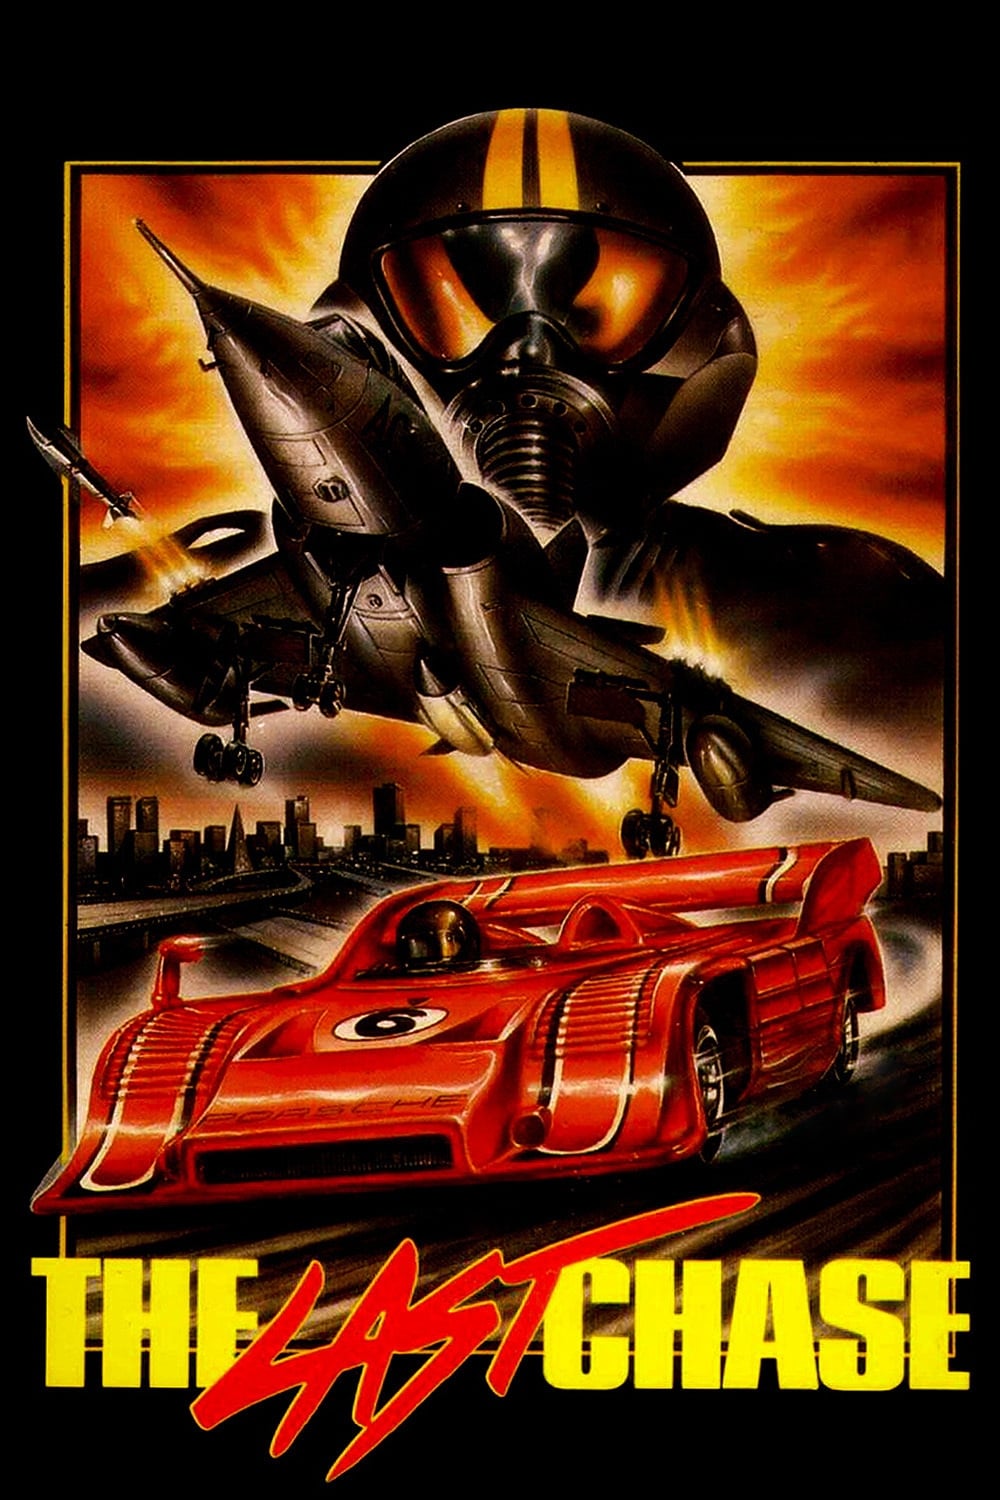 The Last Chase (1981)